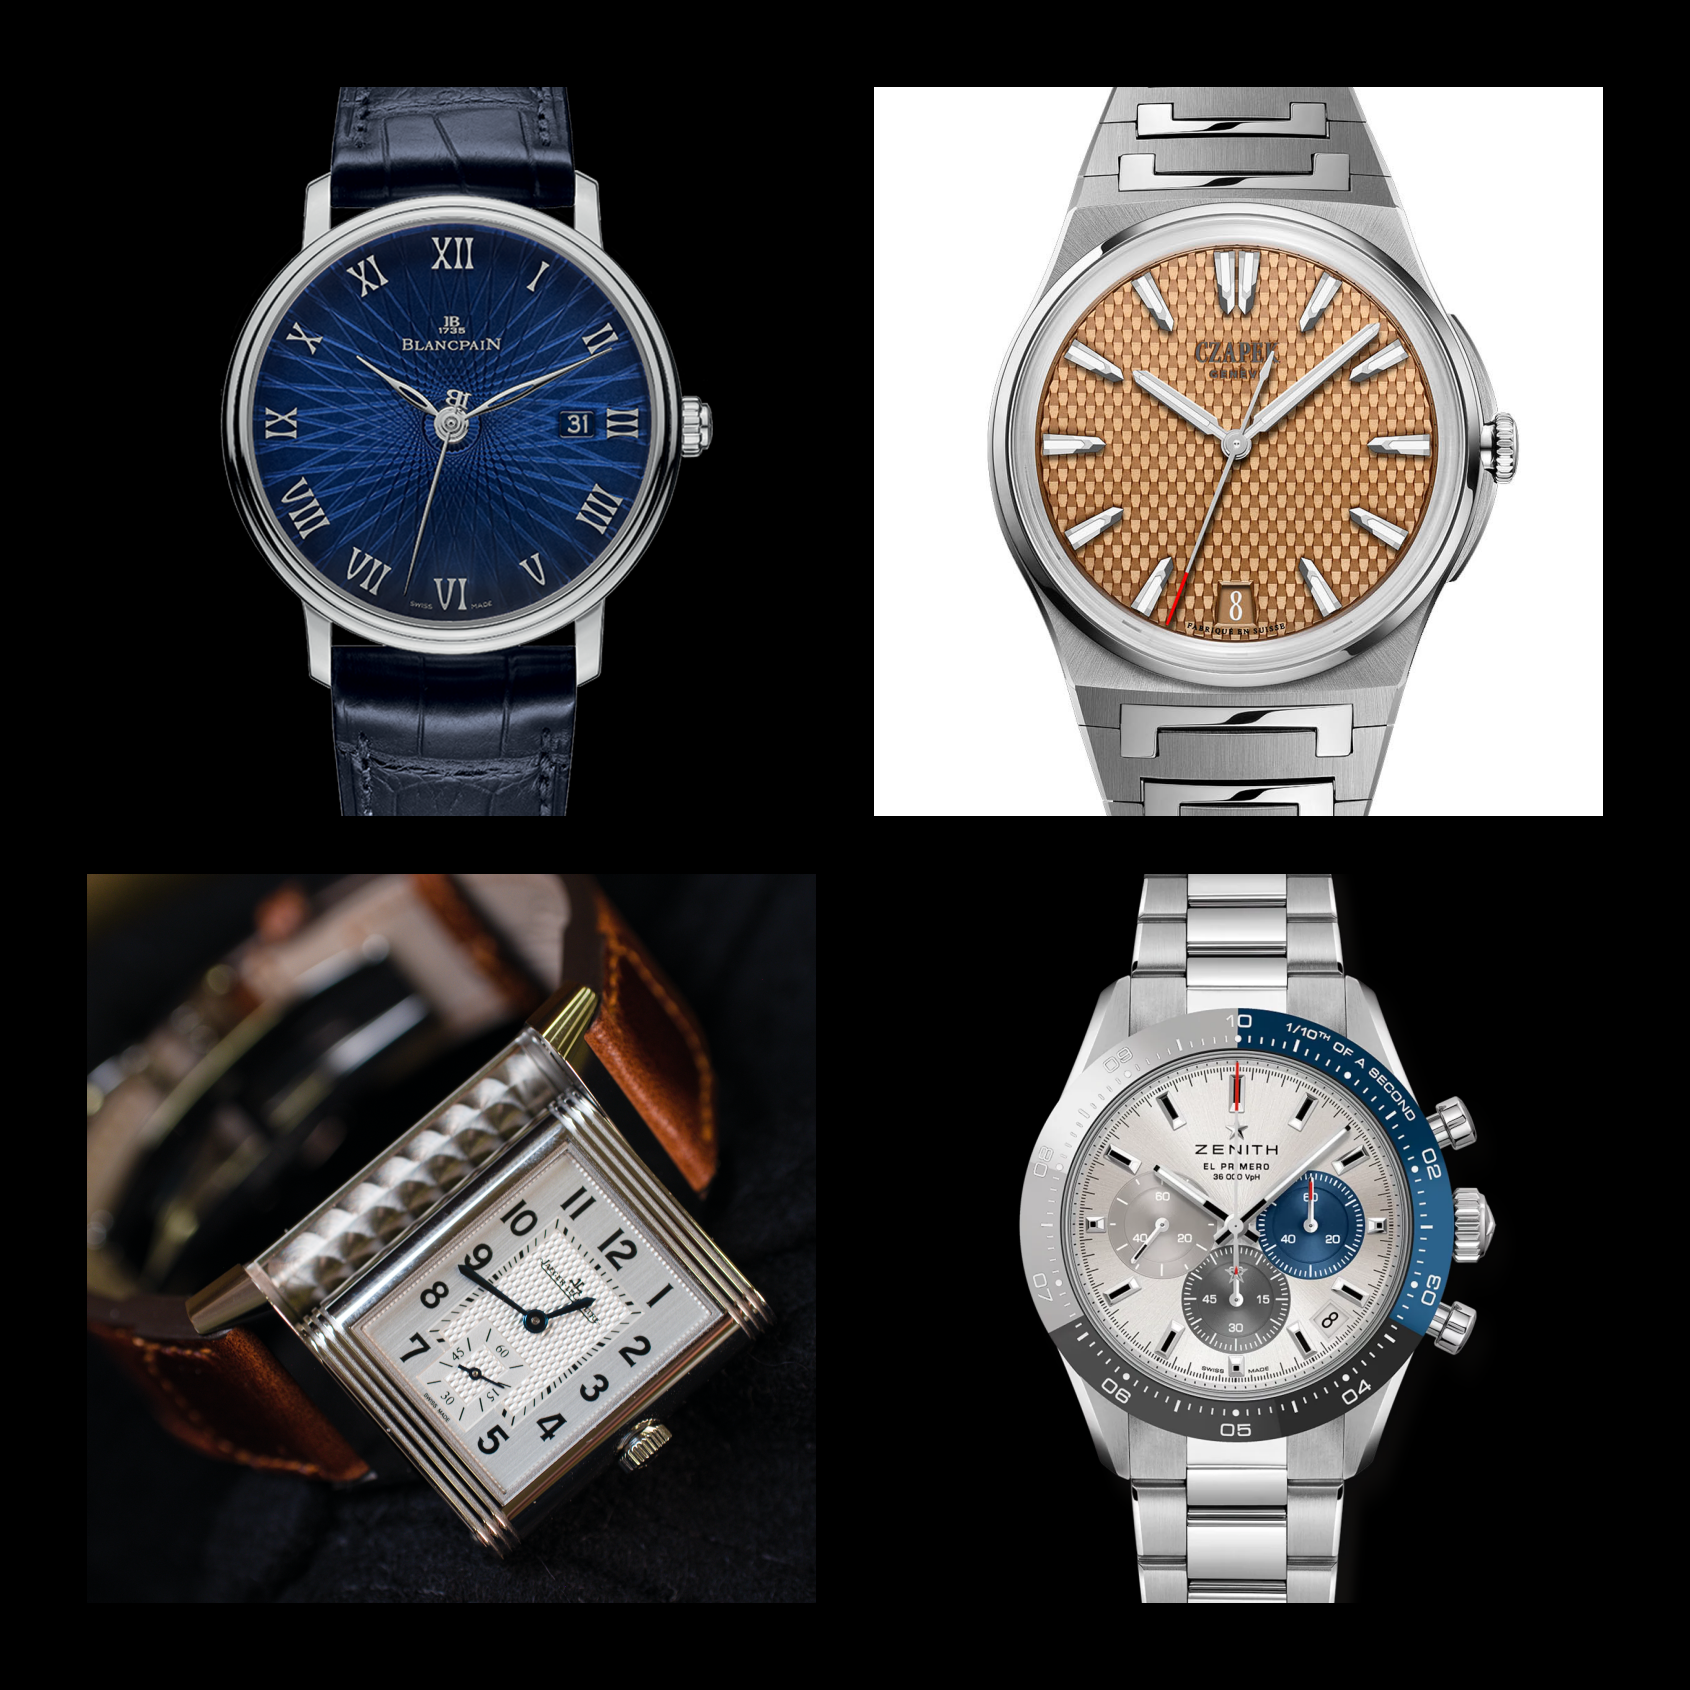 T+T Holiday Picks: The best watches to gift for $10,000 – $20,000 (2022 edition)